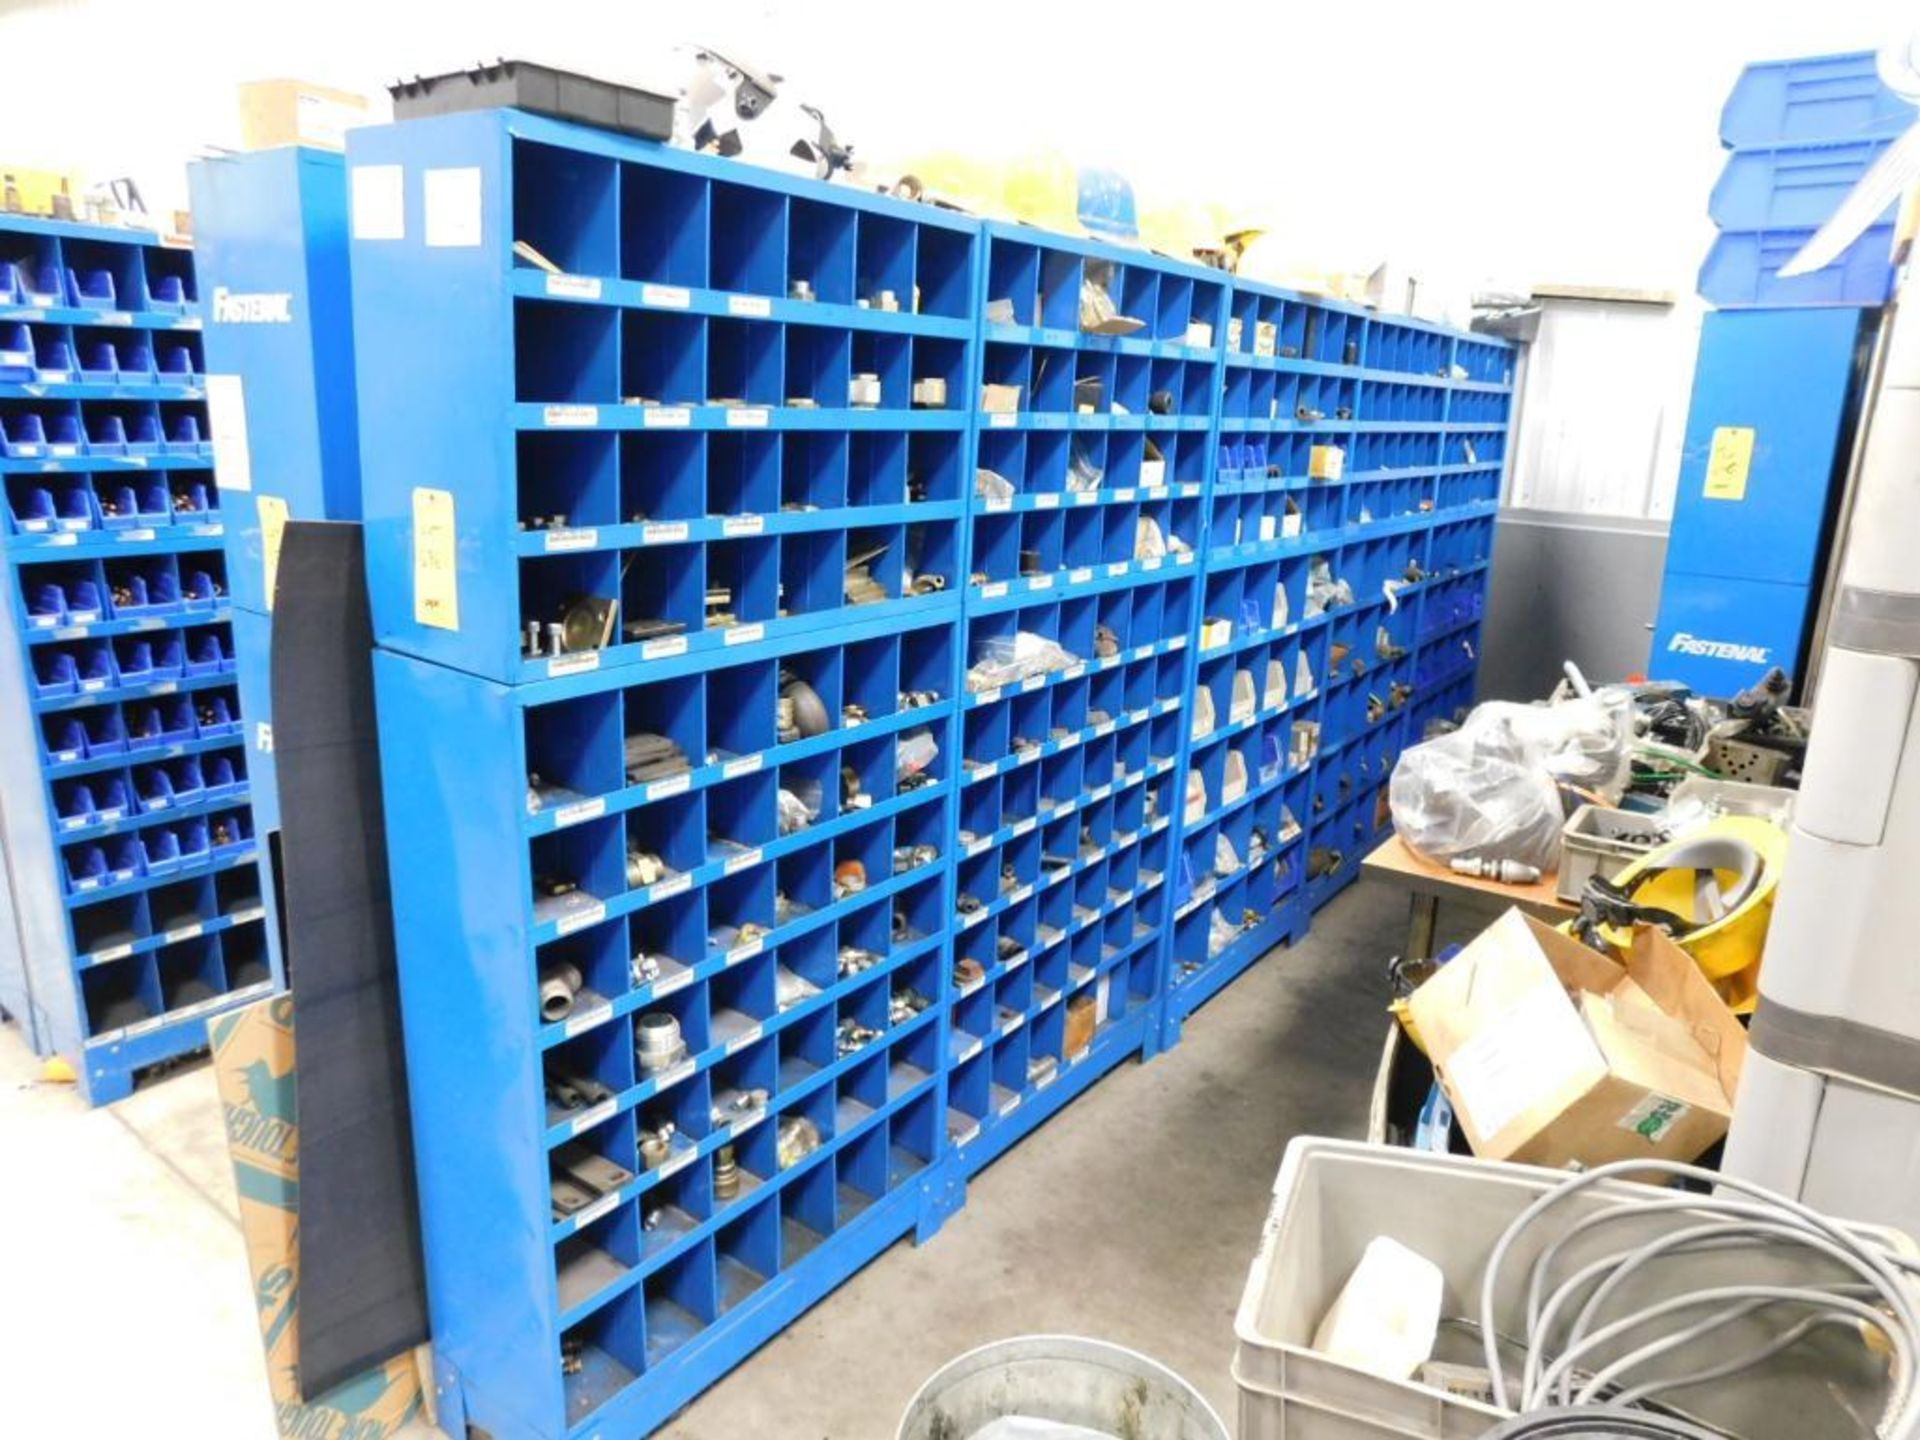 LOT: (7) Sections Fastenal Compartment Organizers w/Contents of Hardware, Plumbing, etc.